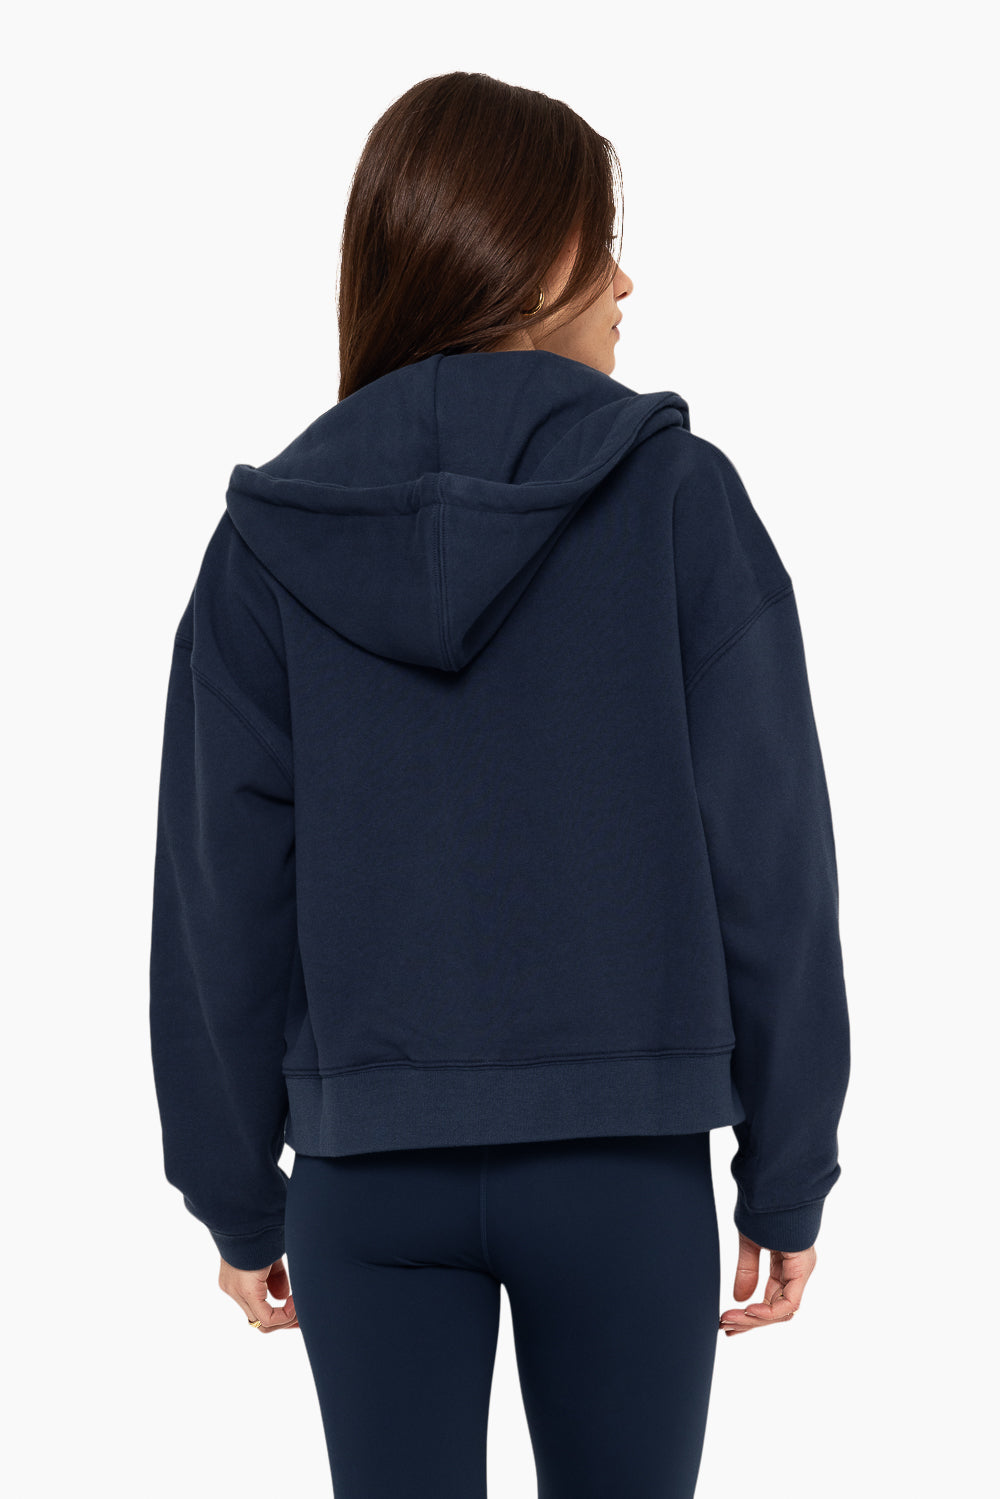 SET™ EMBROIDERED HEAVYWEIGHT SWEATS ZIP HOODIE IN OXFORD